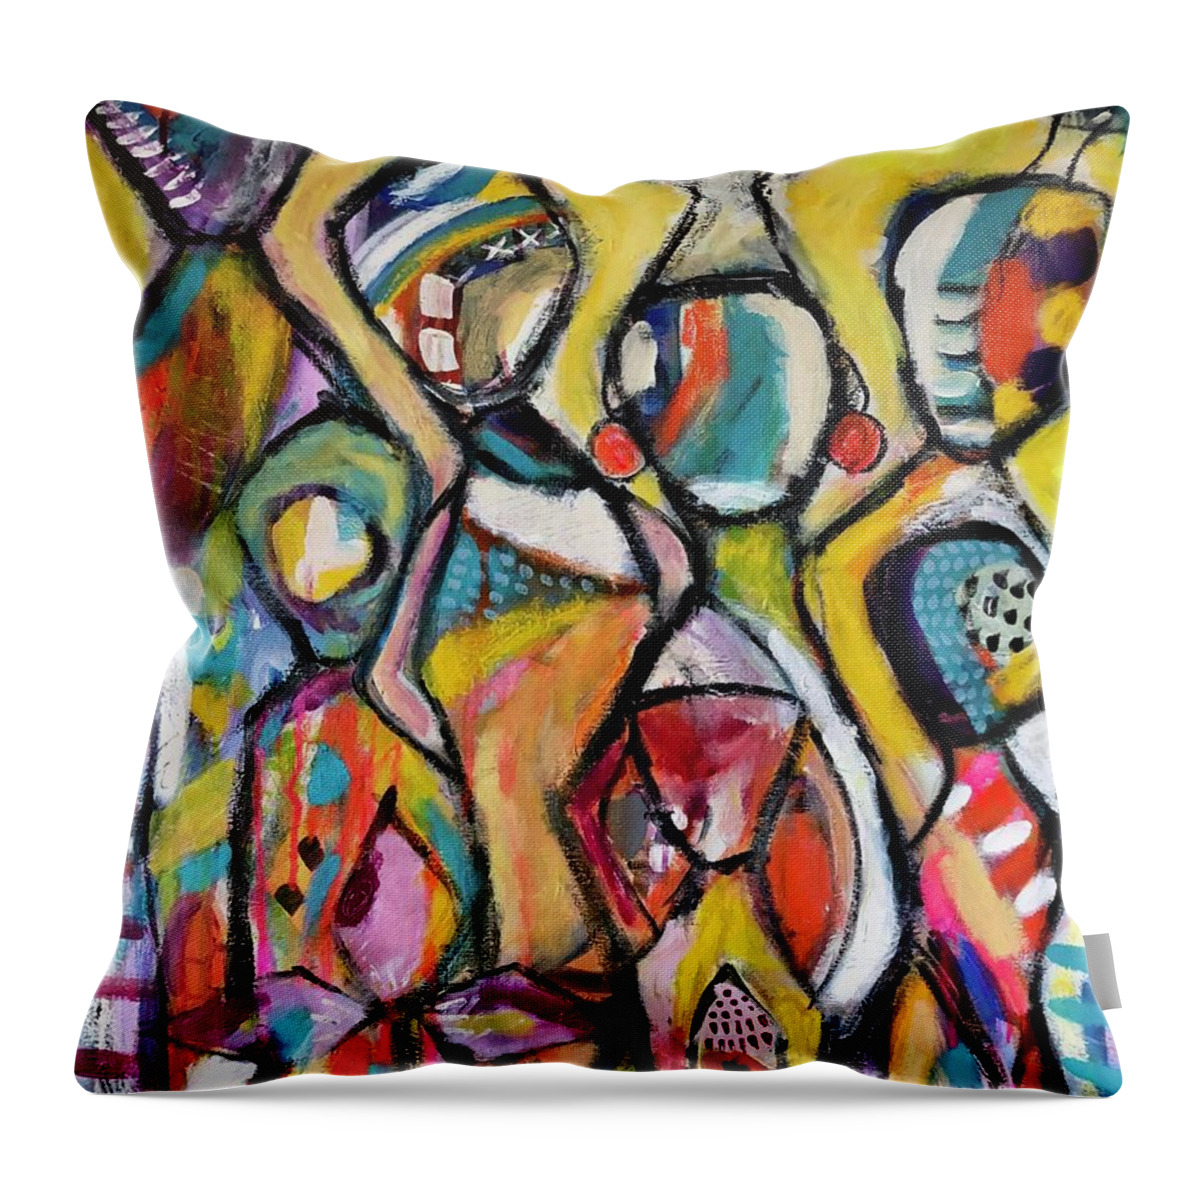 Together Throw Pillow featuring the mixed media Together we are strong by Corina Stupu Thomas